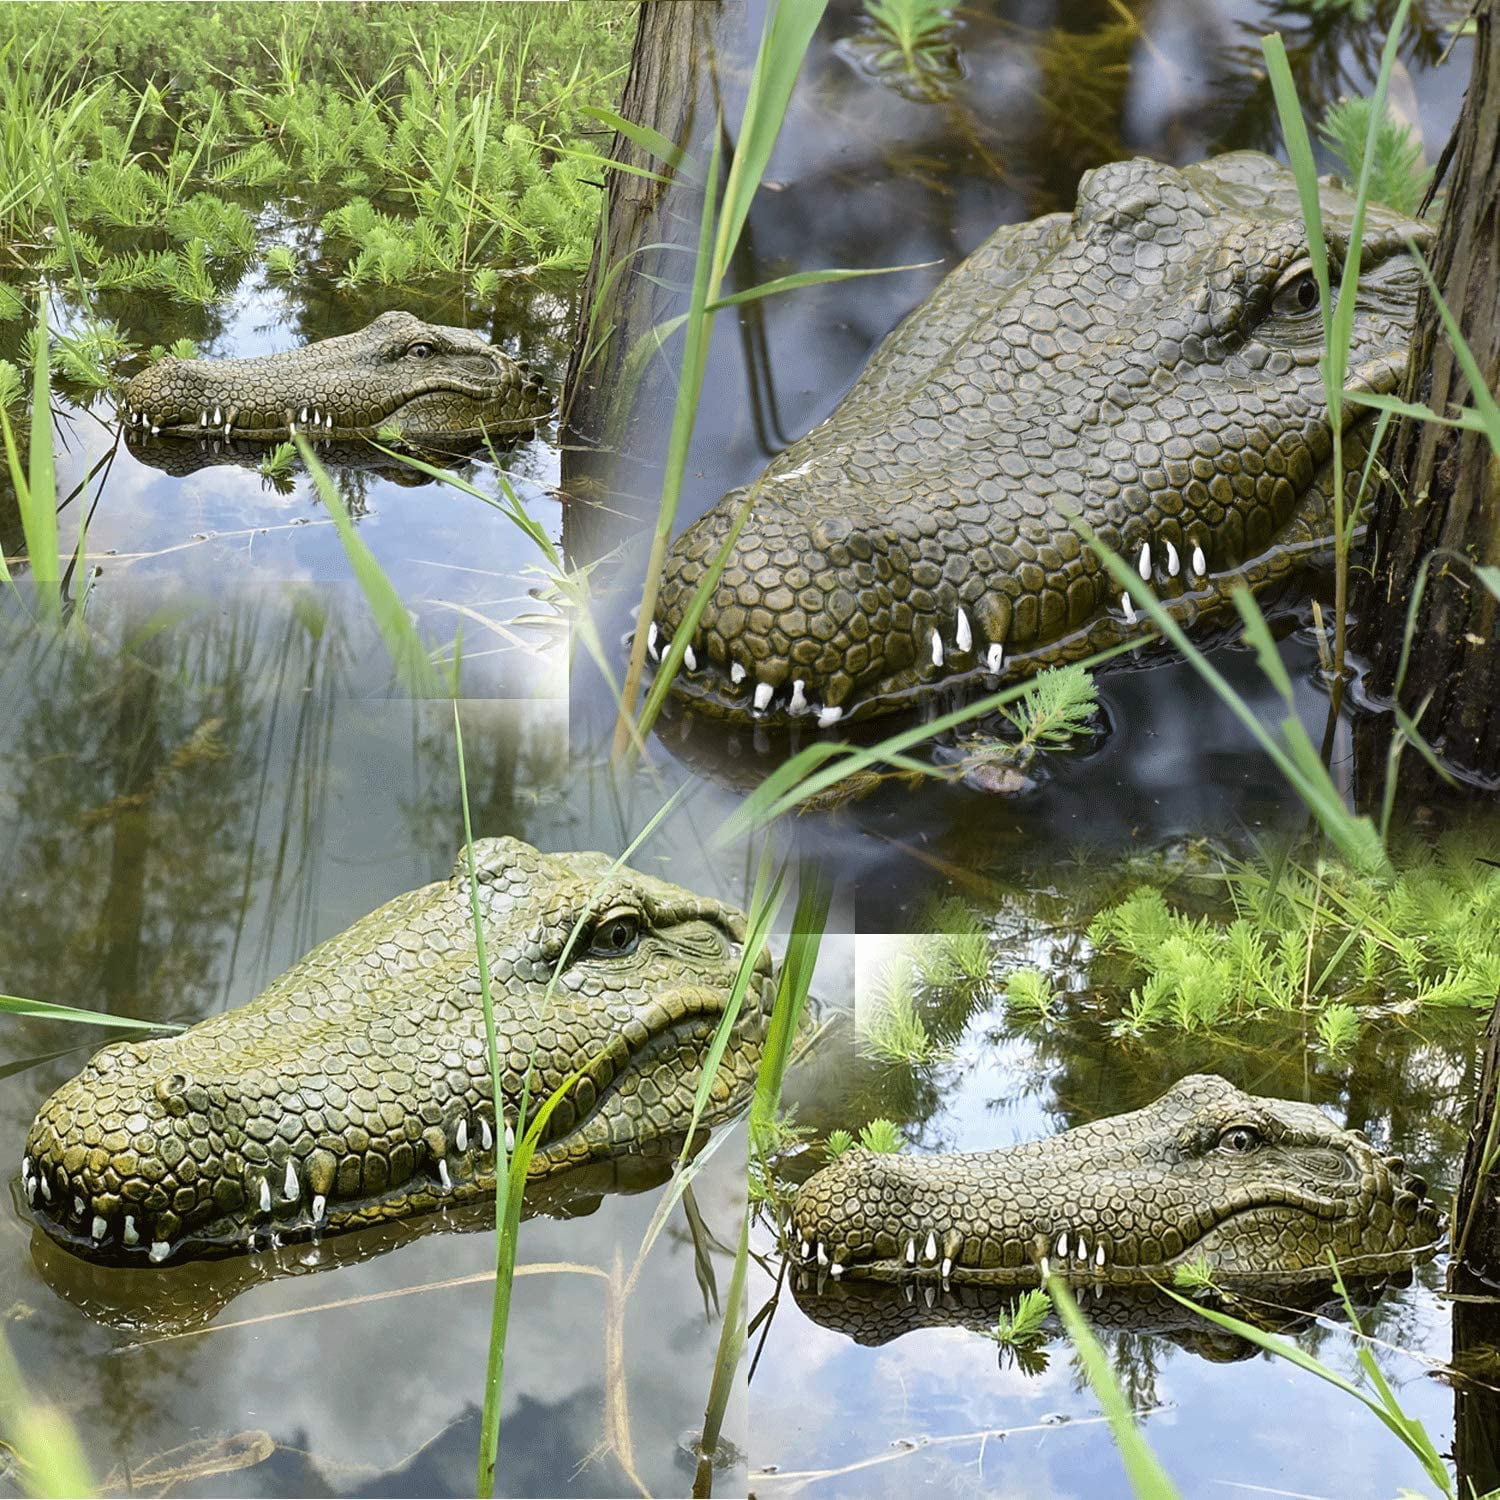 Remote Control Alligator Head Boat Large Decoy and Floating Crocodile Head for Adults and Boys Prank Pond Toys RC Boats for Pools and Lakes for Kids